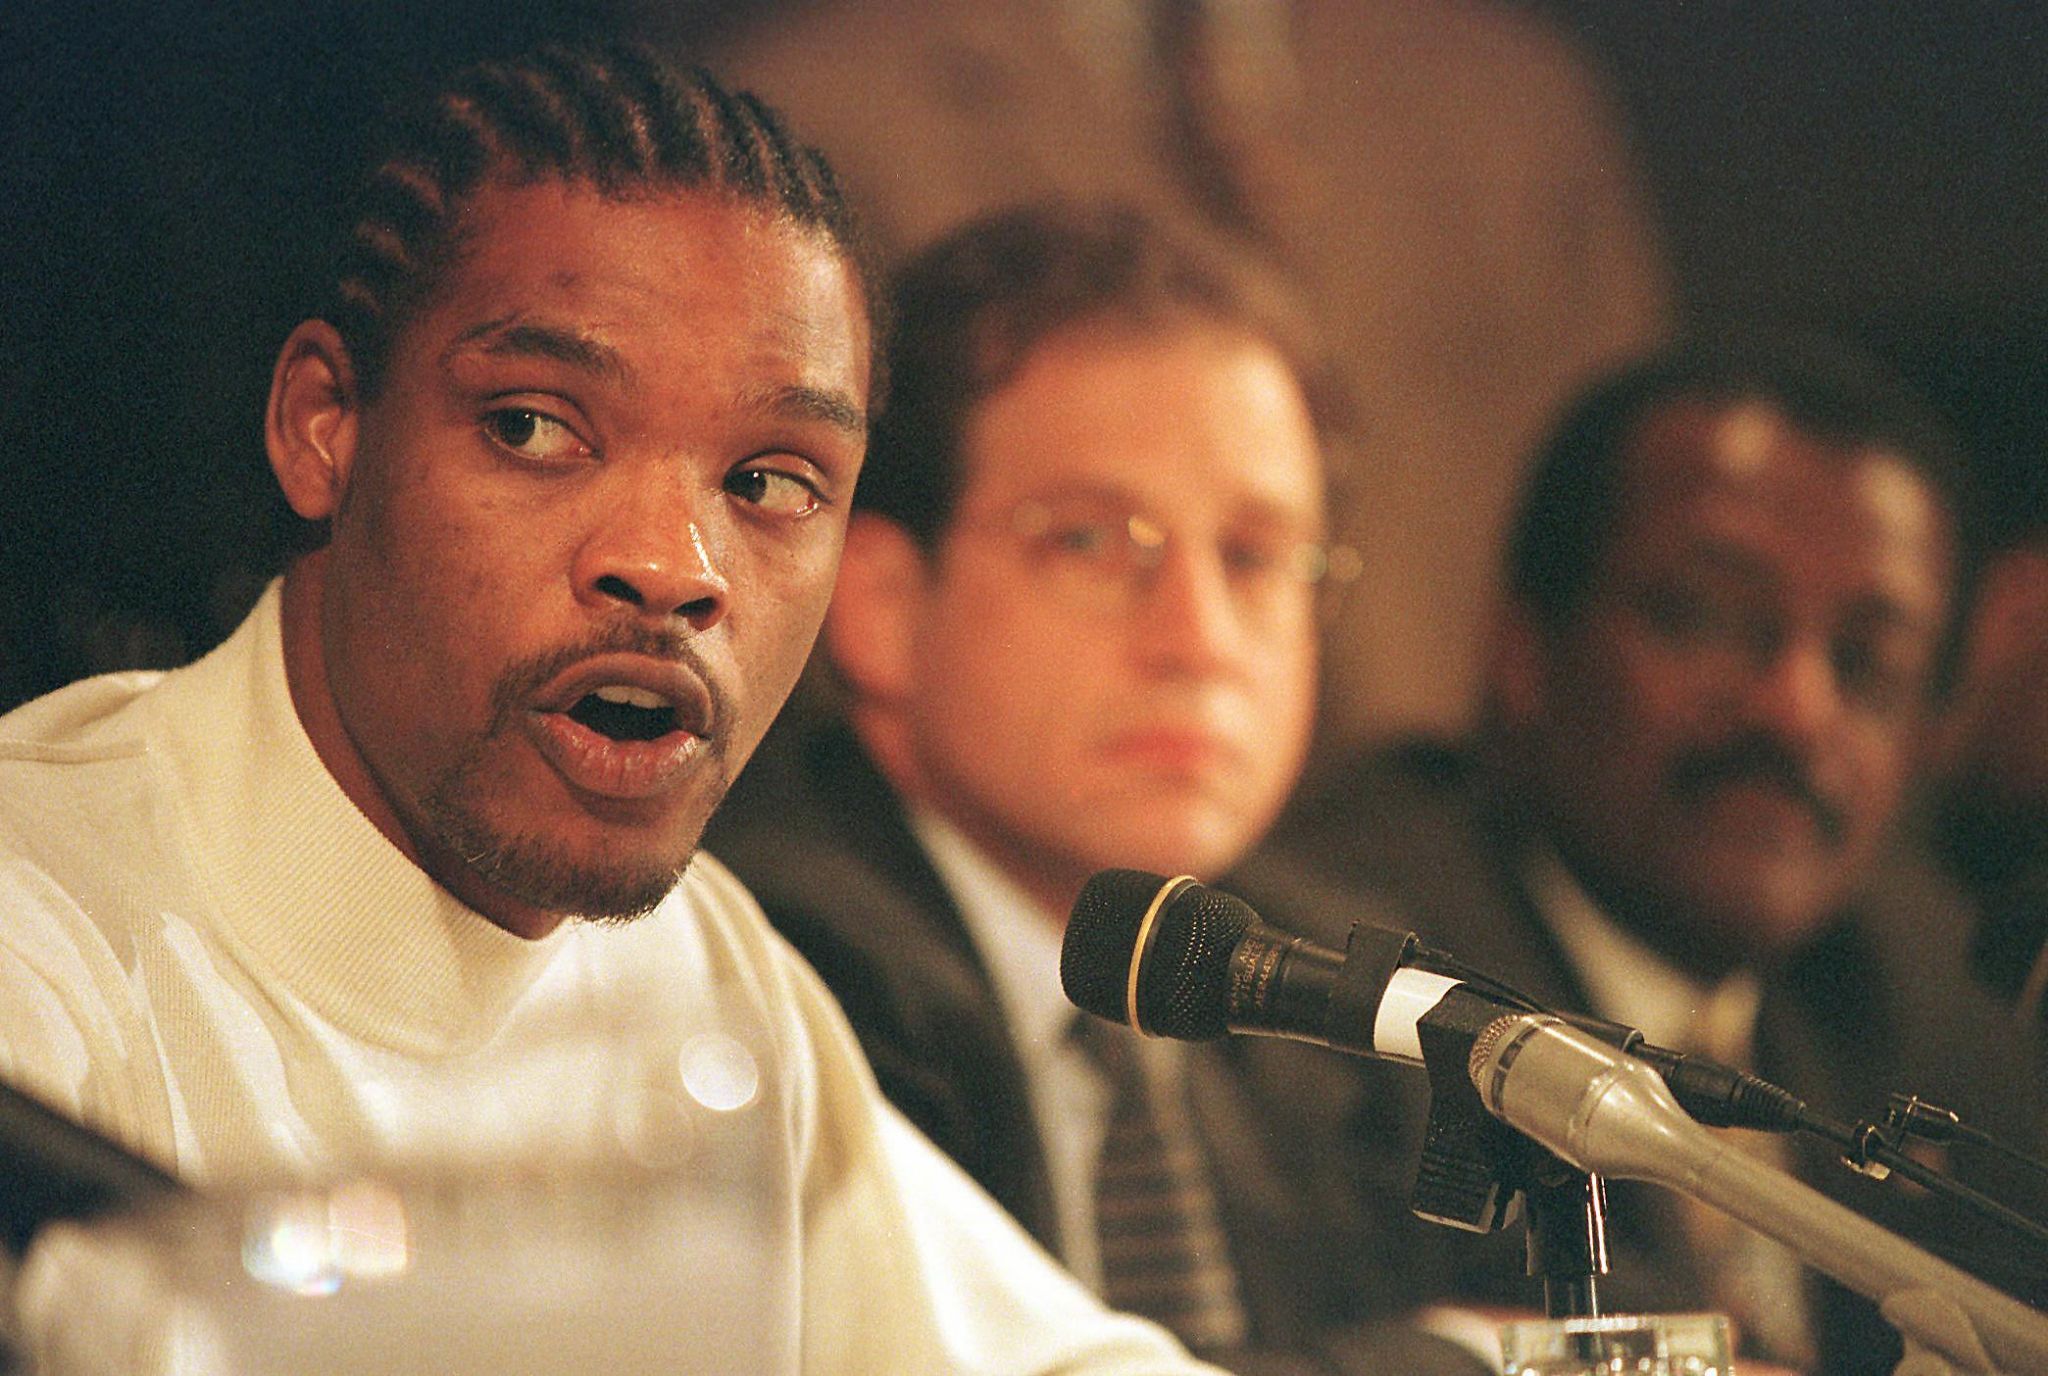 P.J. Carlesimo's new chapter: 15 years after Latrell Sprewell choked him,  coach has strong grip on Nets - Newsday